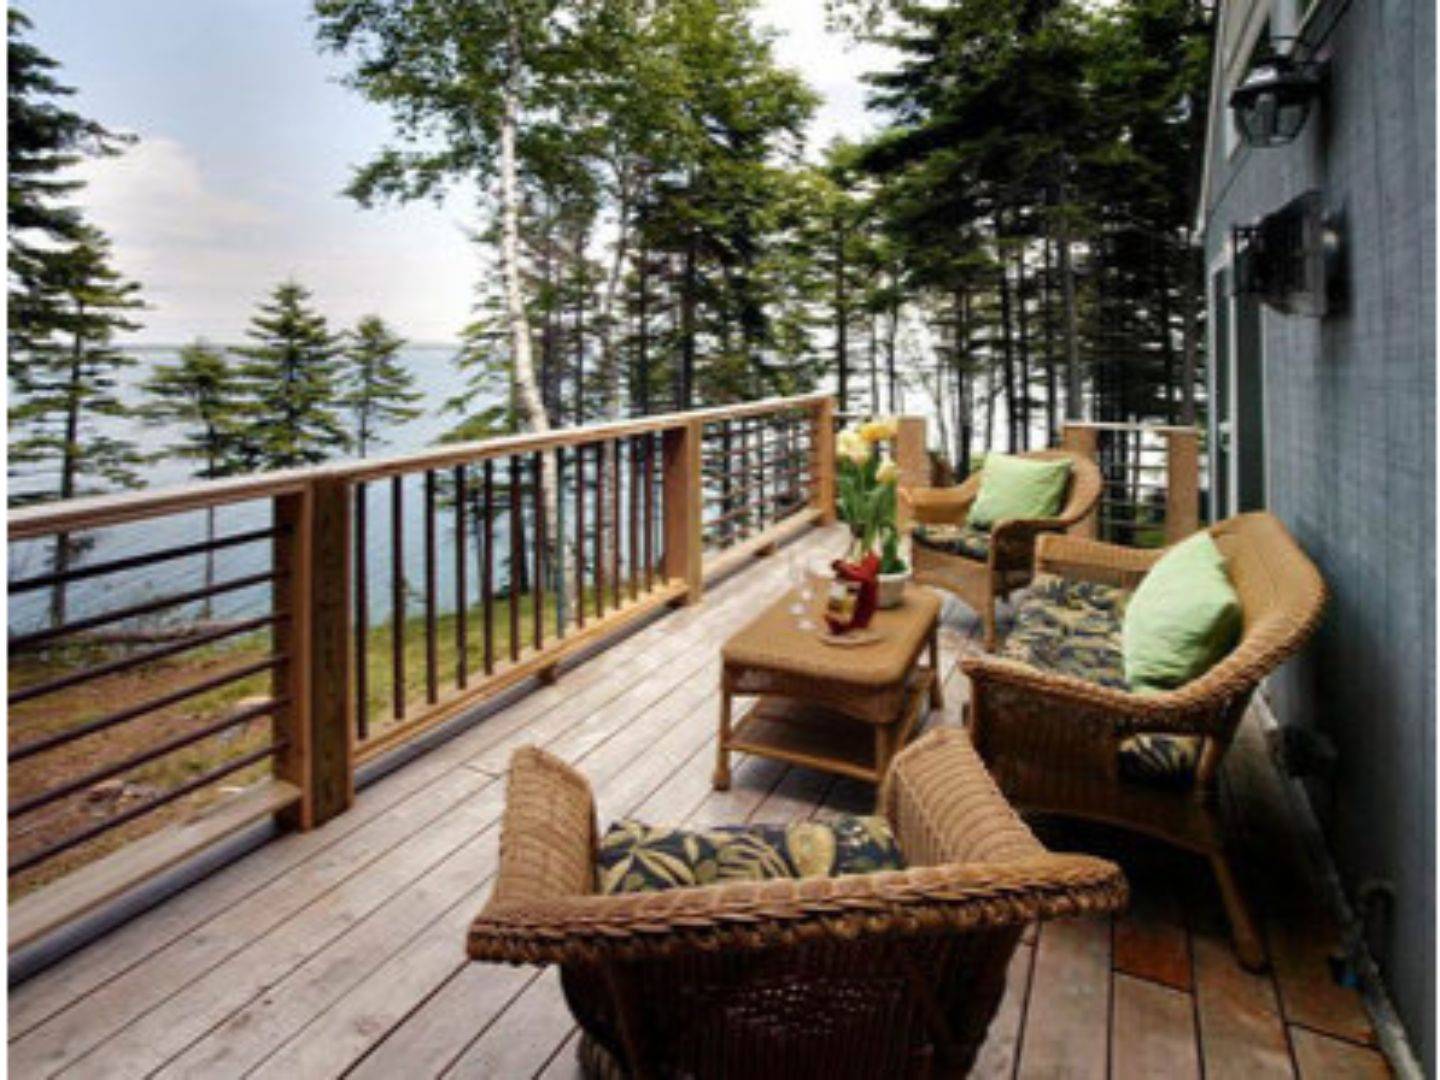 Bar Harbor Bed and Breakfast